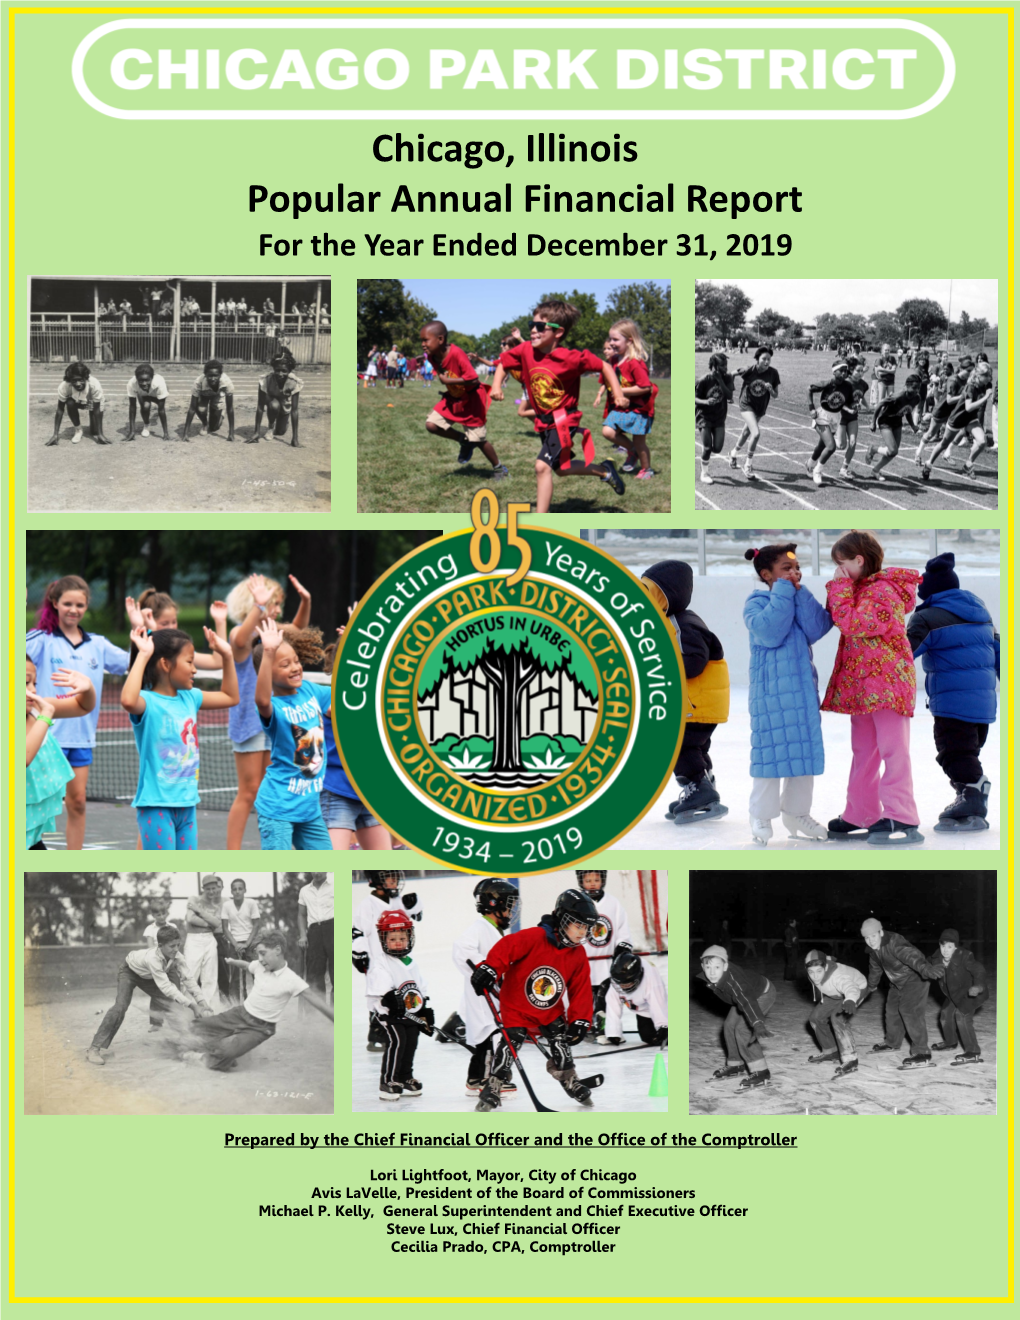 Chicago, Illinois Popular Annual Financial Report for the Year Ended December 31, 2019